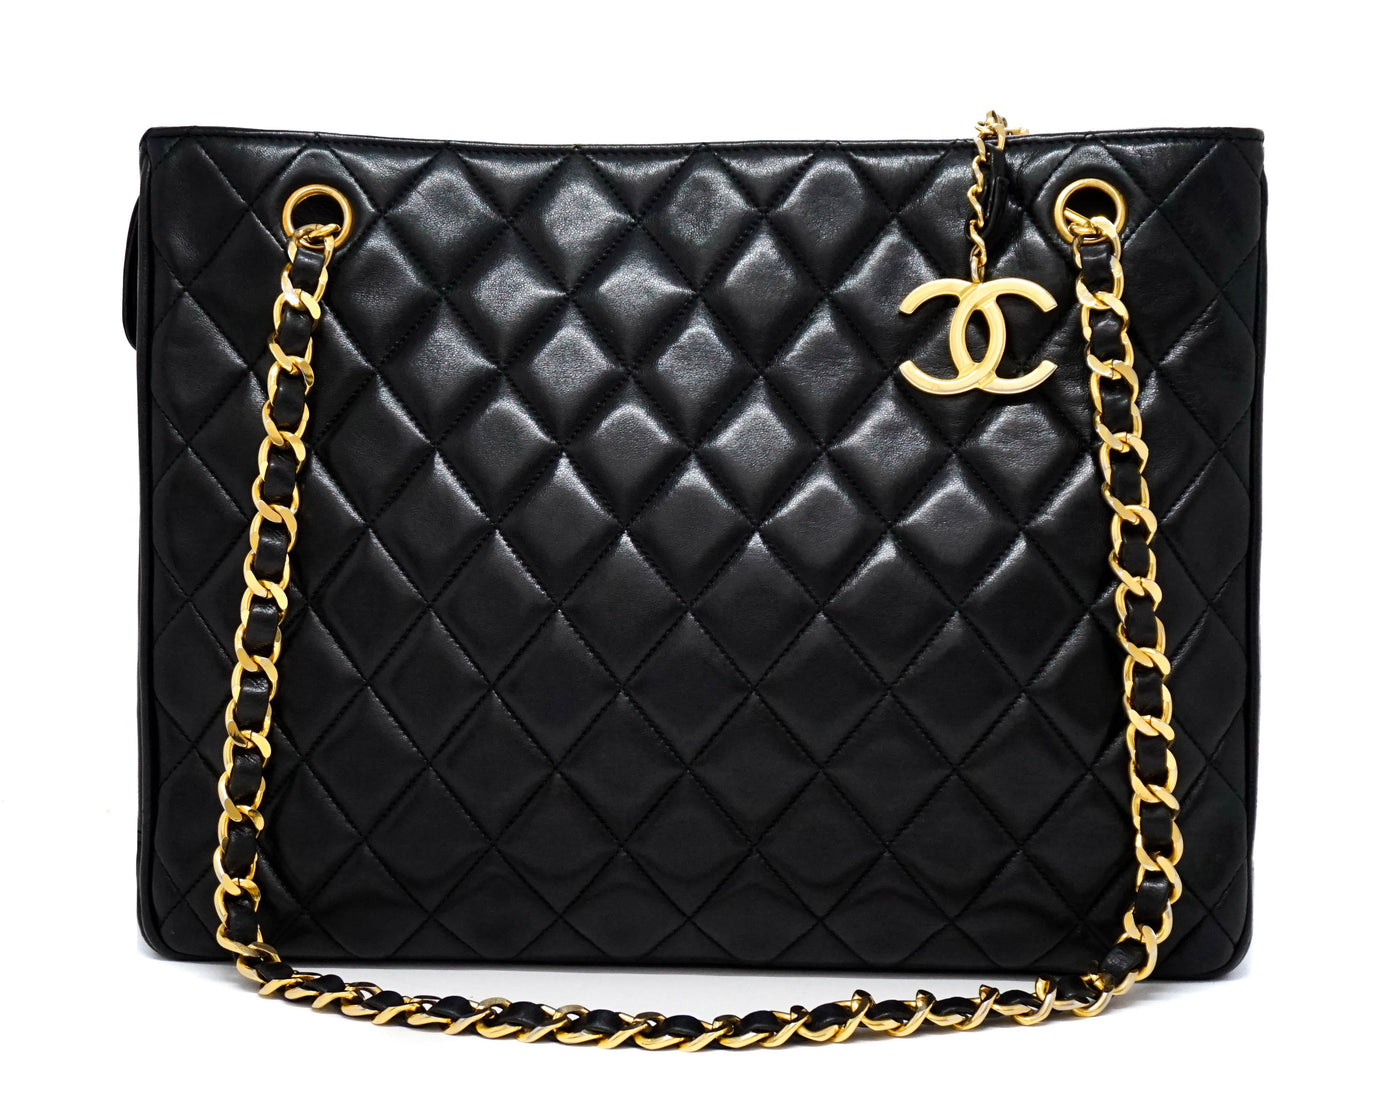 Chanel Vintage Black Lambskin Quilted Tote